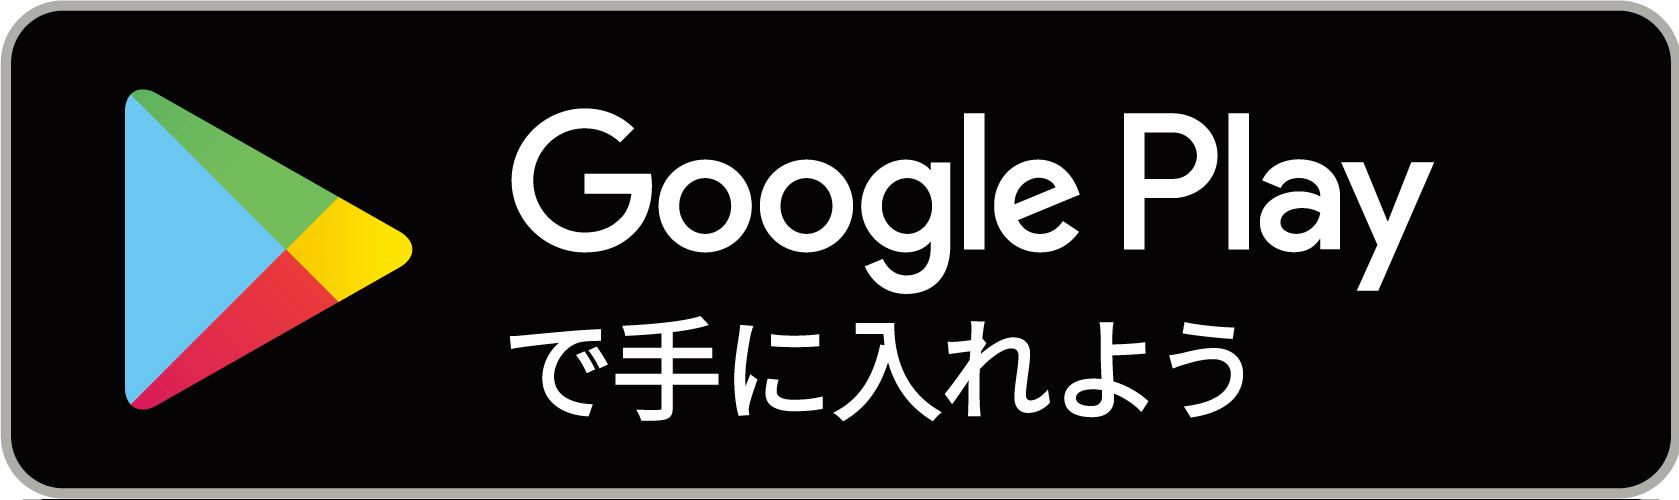 googleplay_icon_large.png